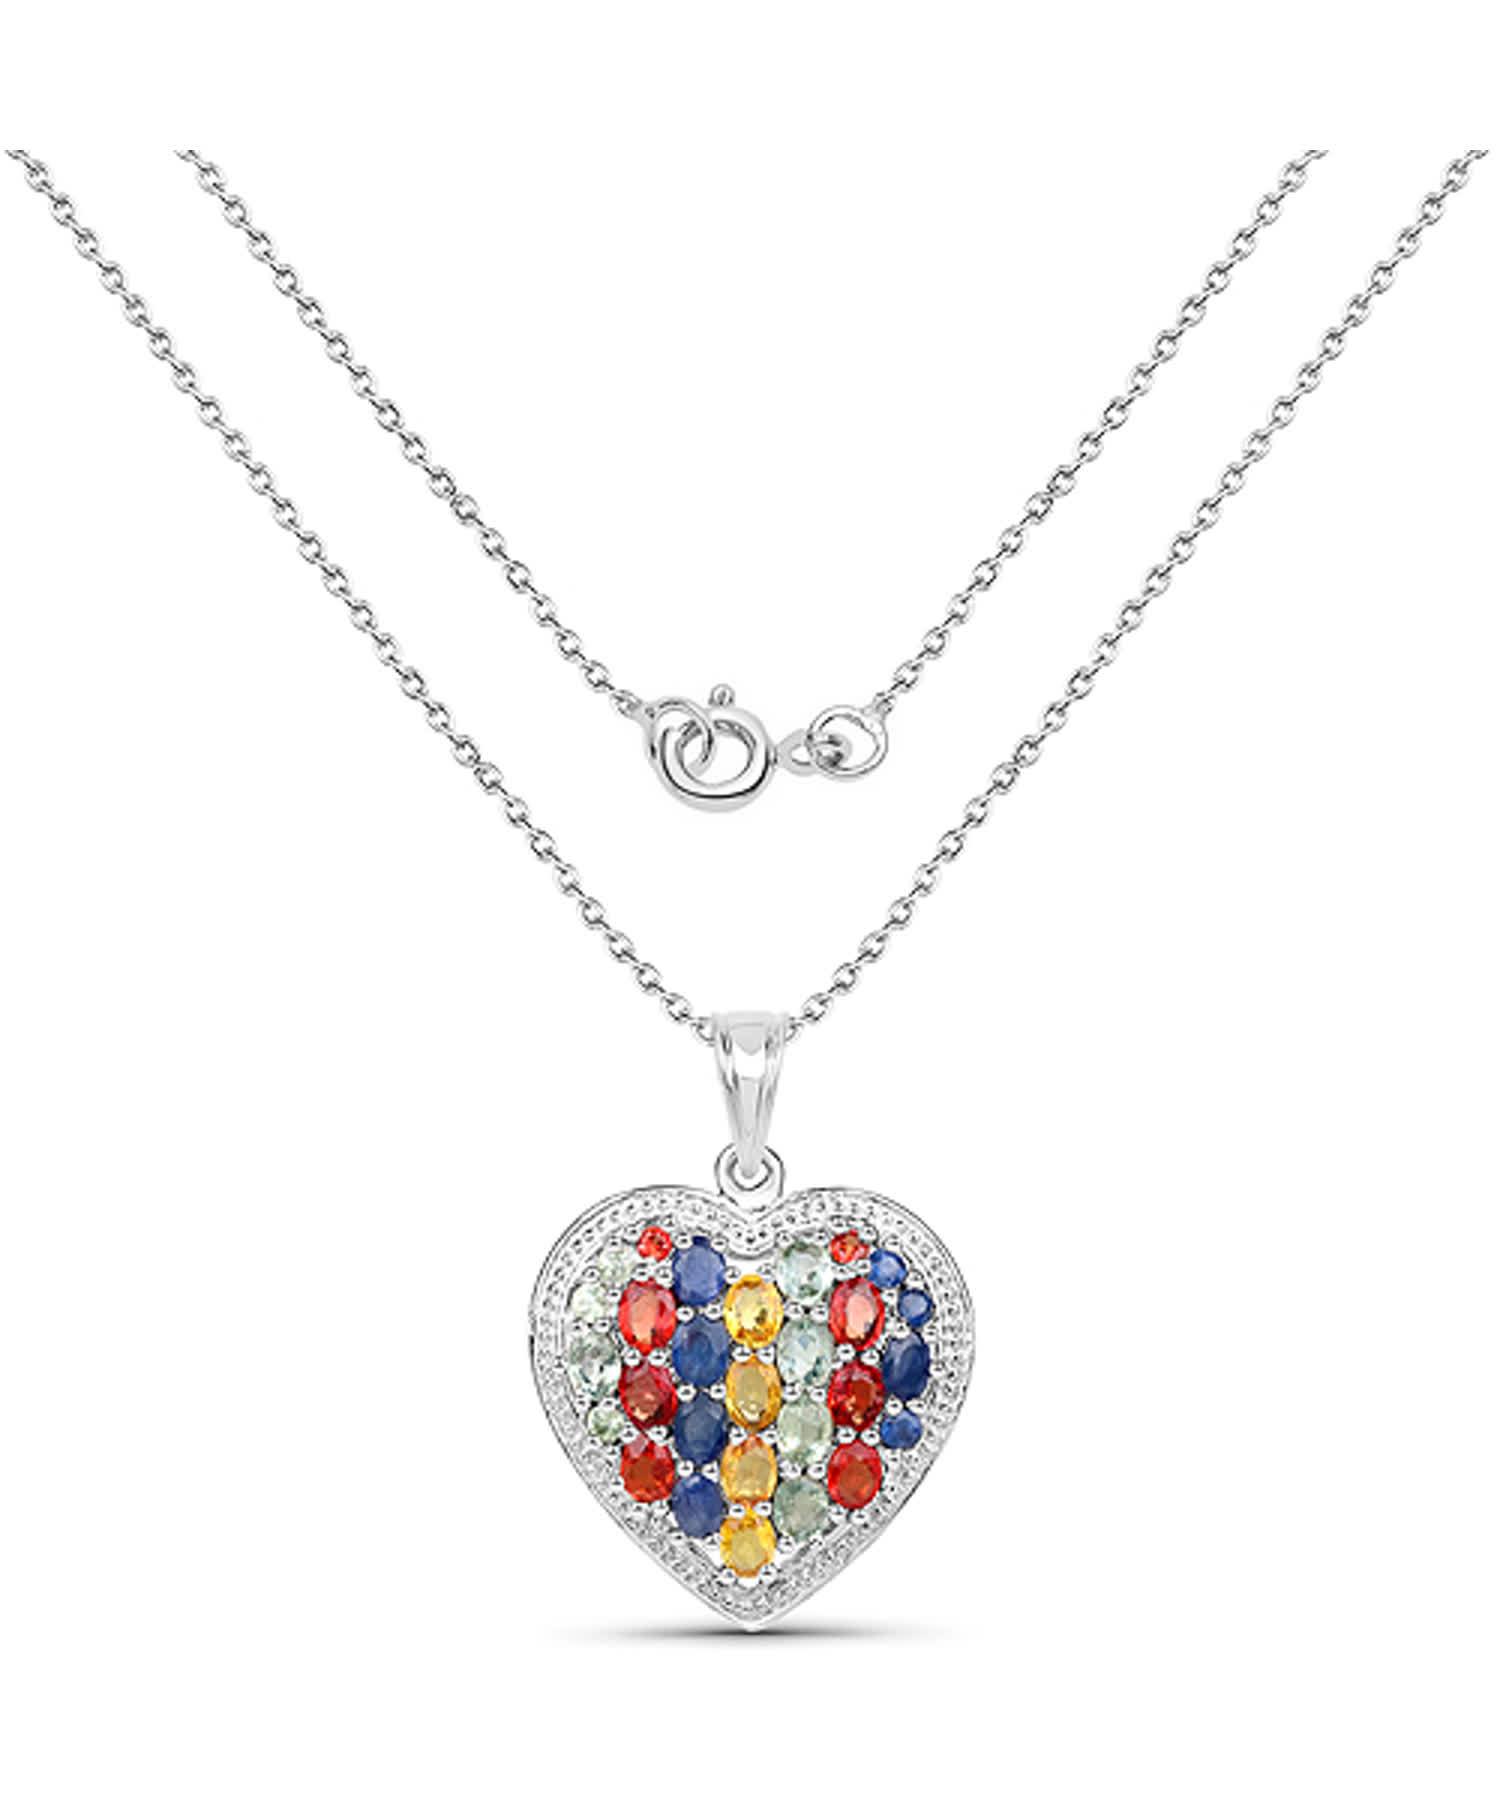 4.88ctw Natural Multi-Color Sapphire Rhodium Plated 925 Sterling Silver Heart Pendant With Chain View 2